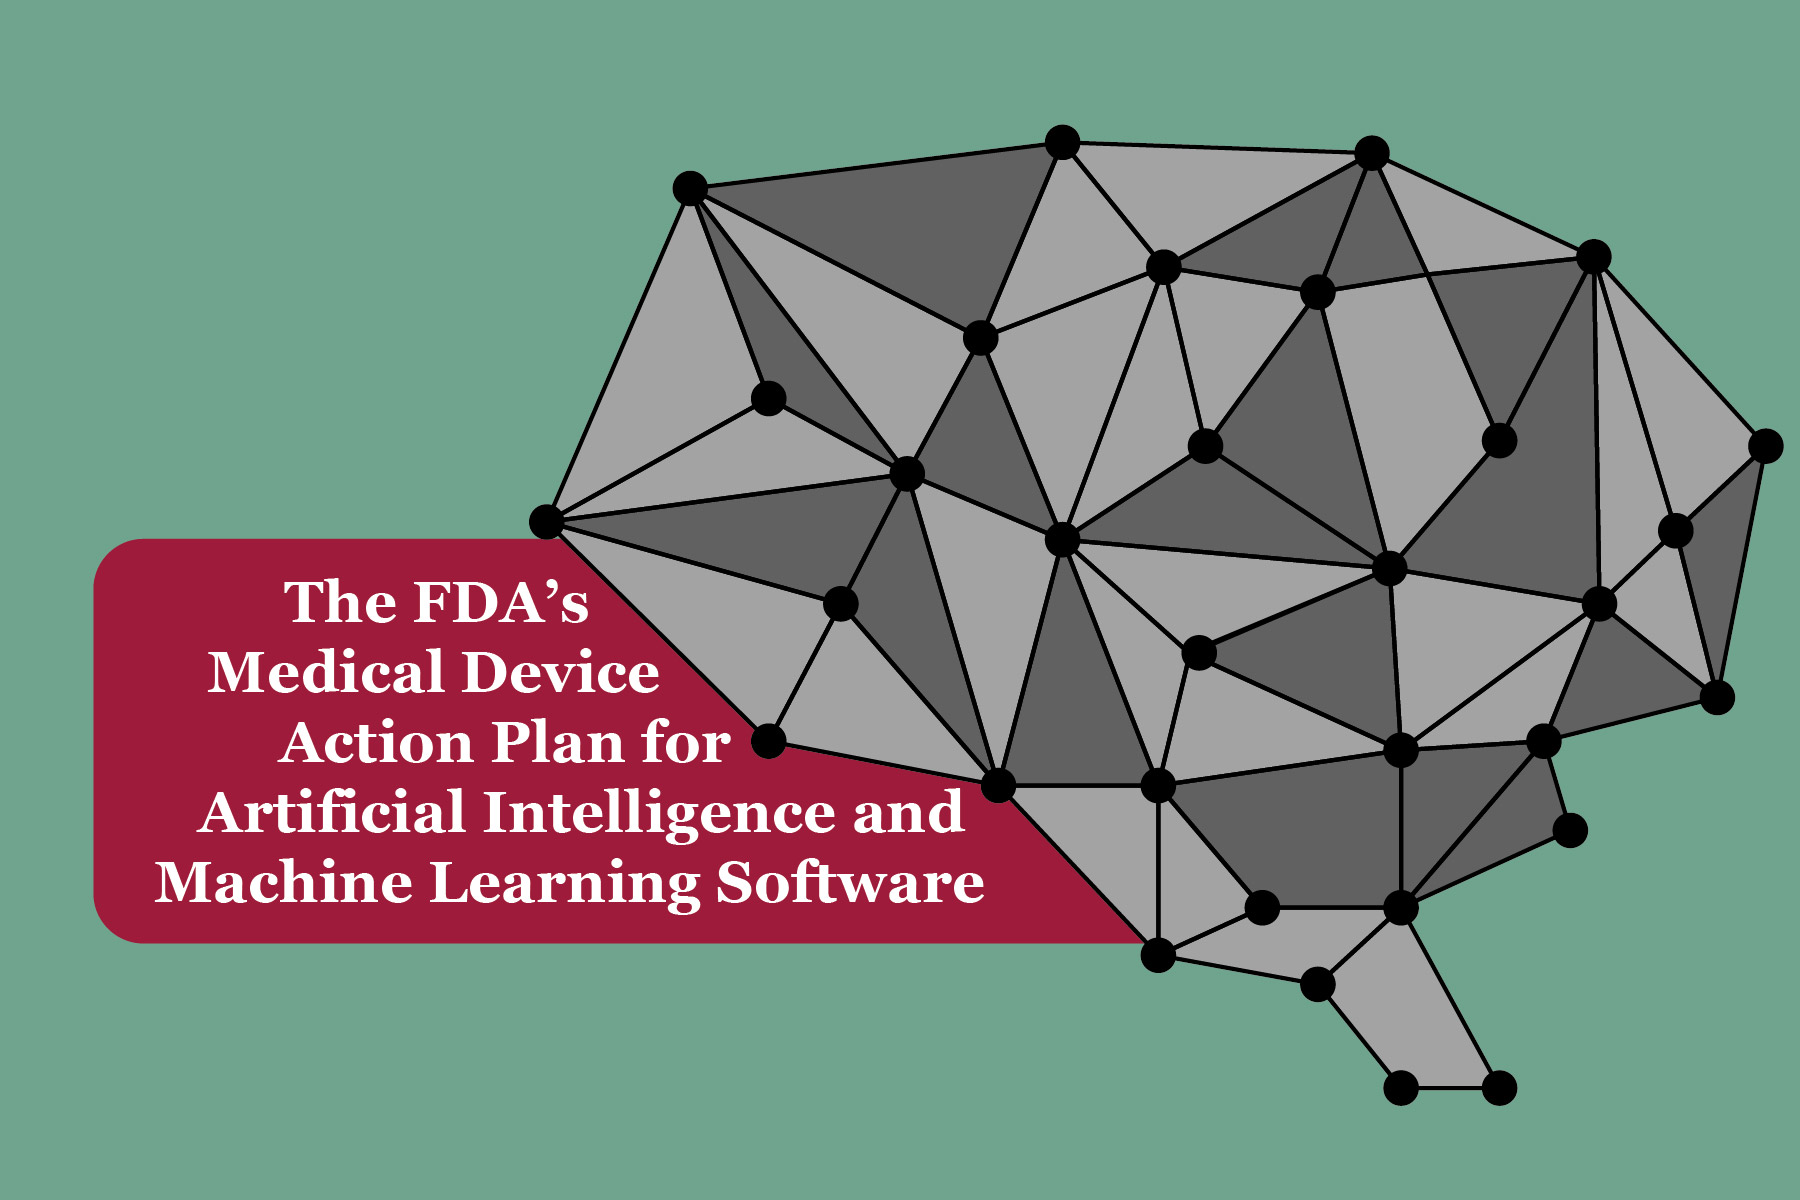 The FDA’s Medical Device Action Plan for Artificial Intelligence and Machine Learning Software